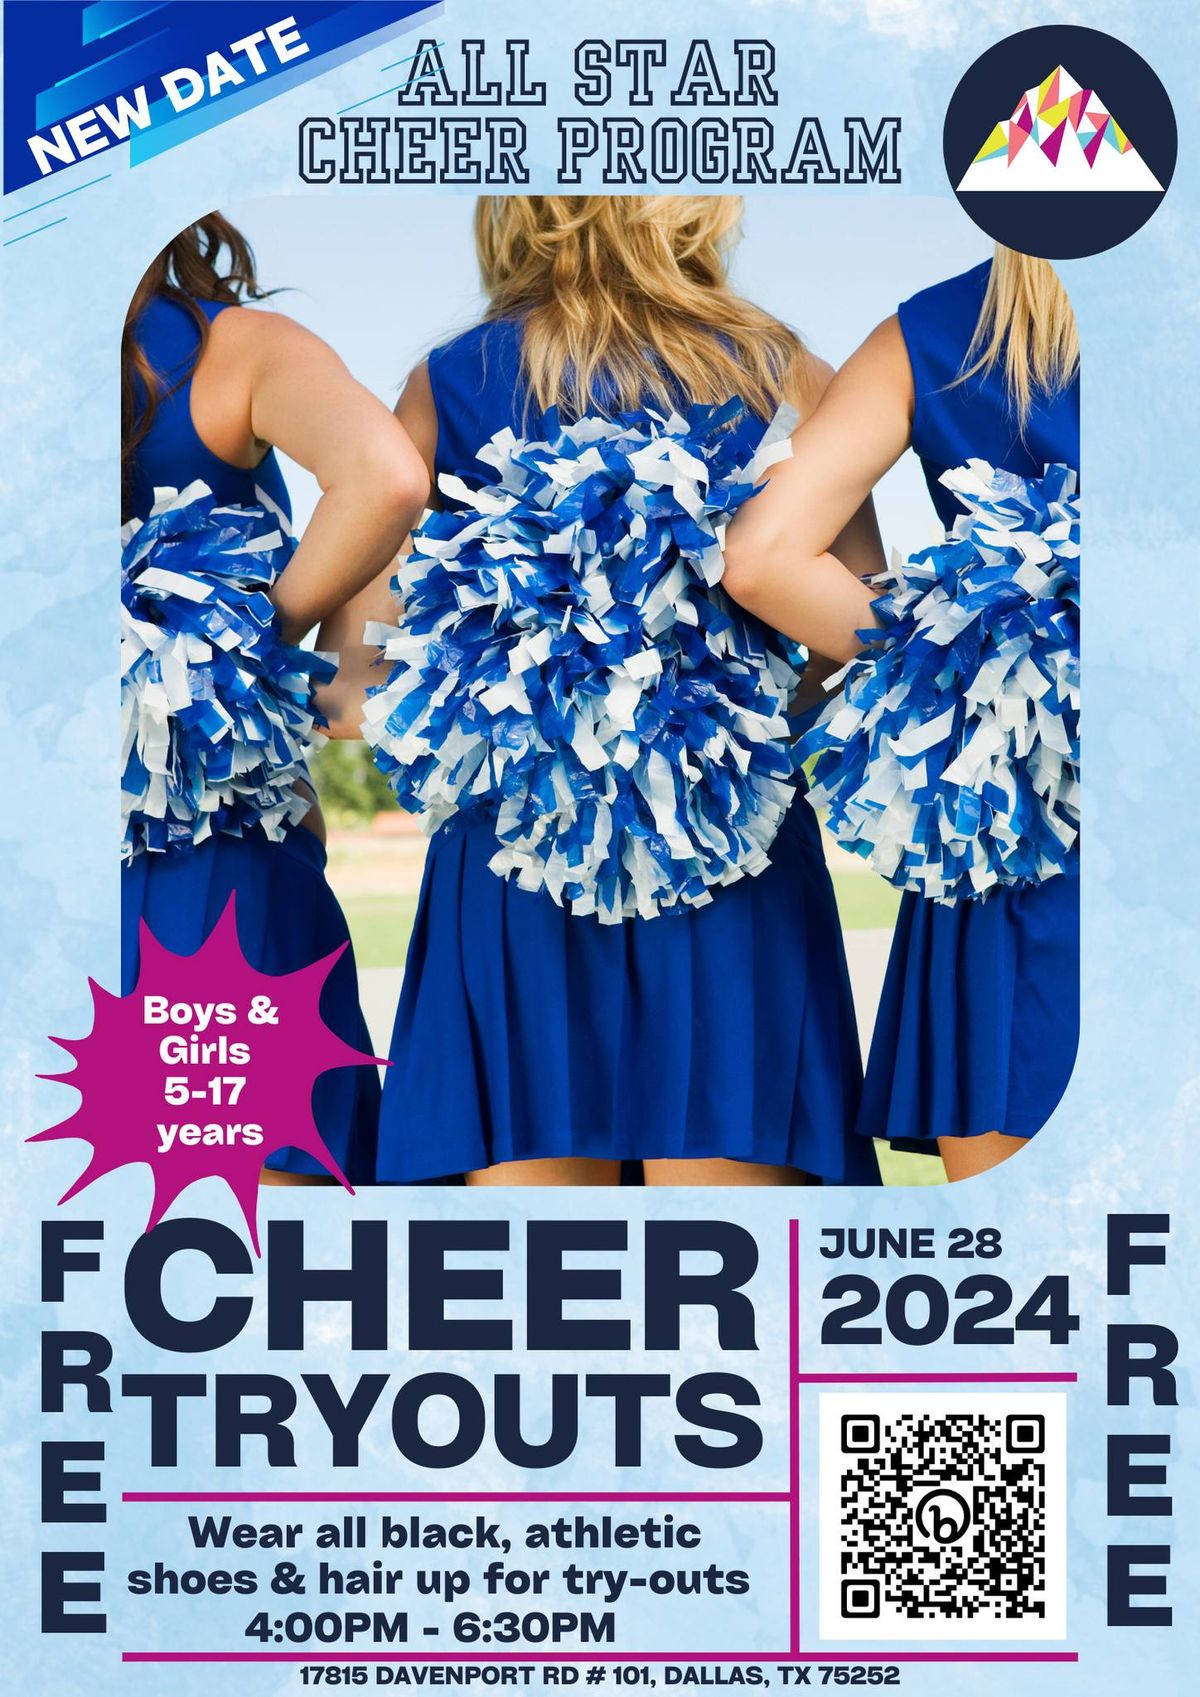 All Star Open Cheer Tryouts